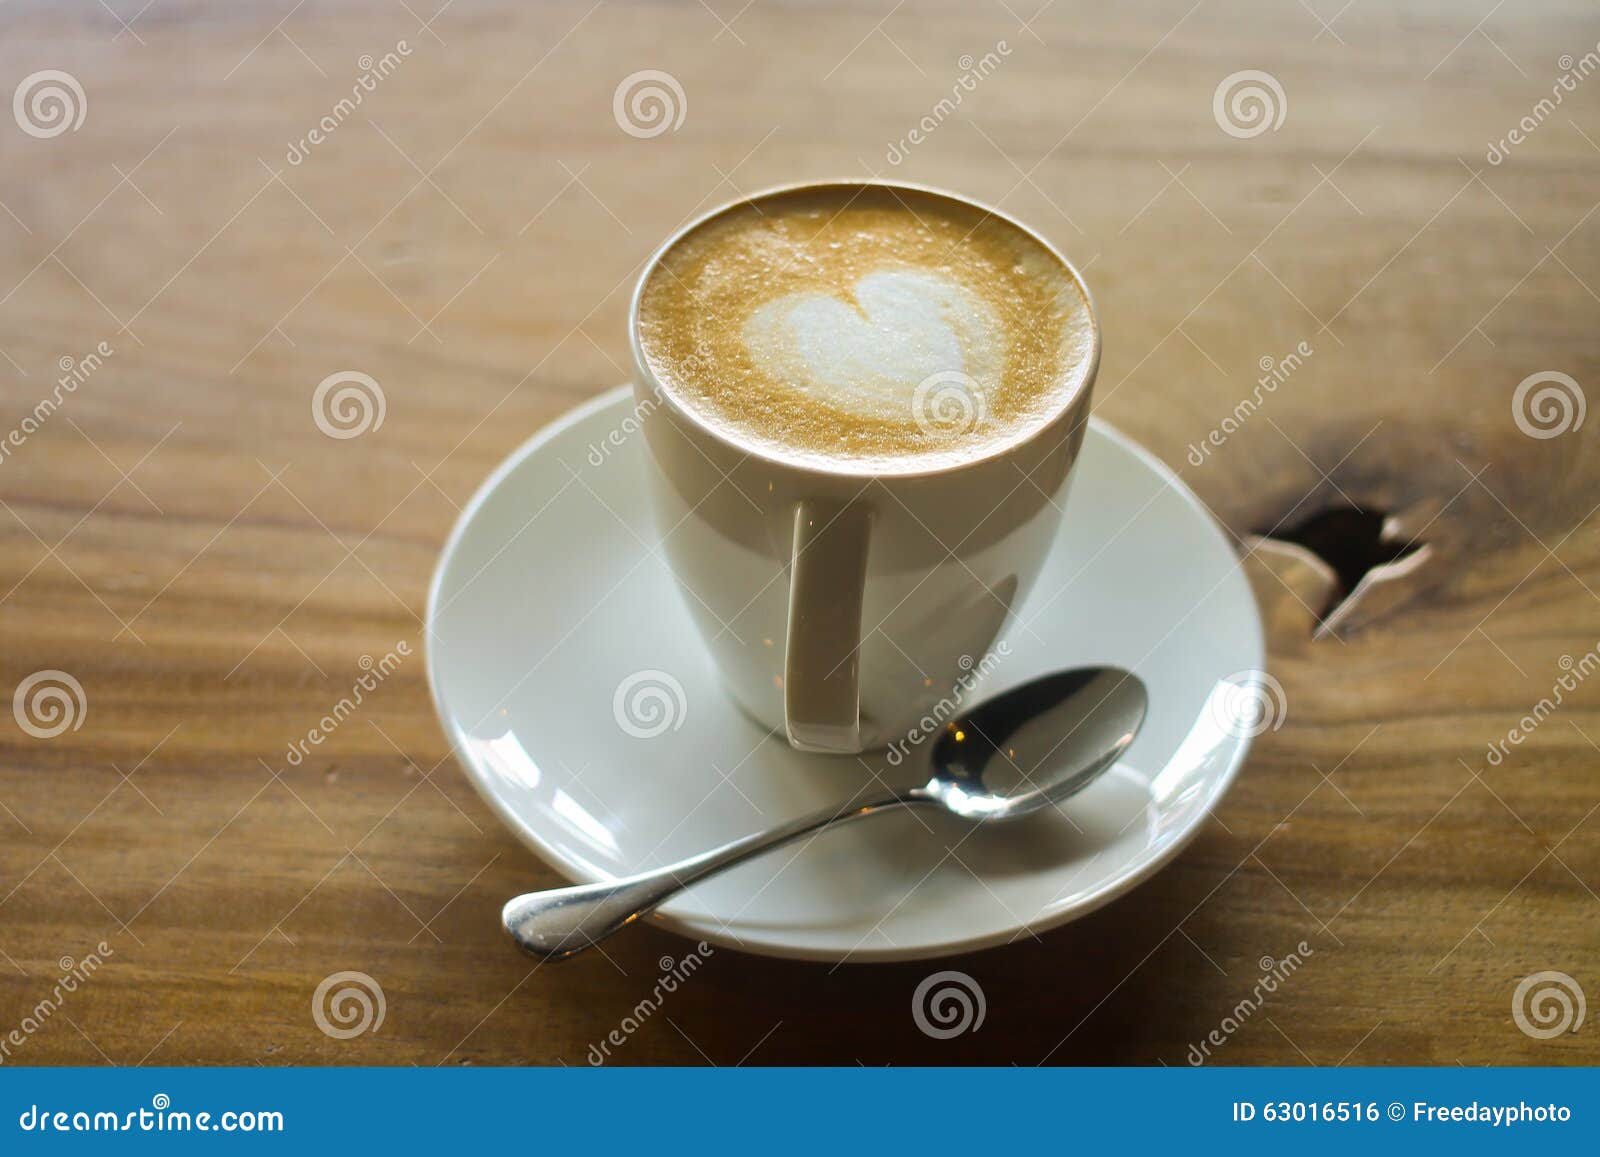 latte art on a cappucinno , on wooden table